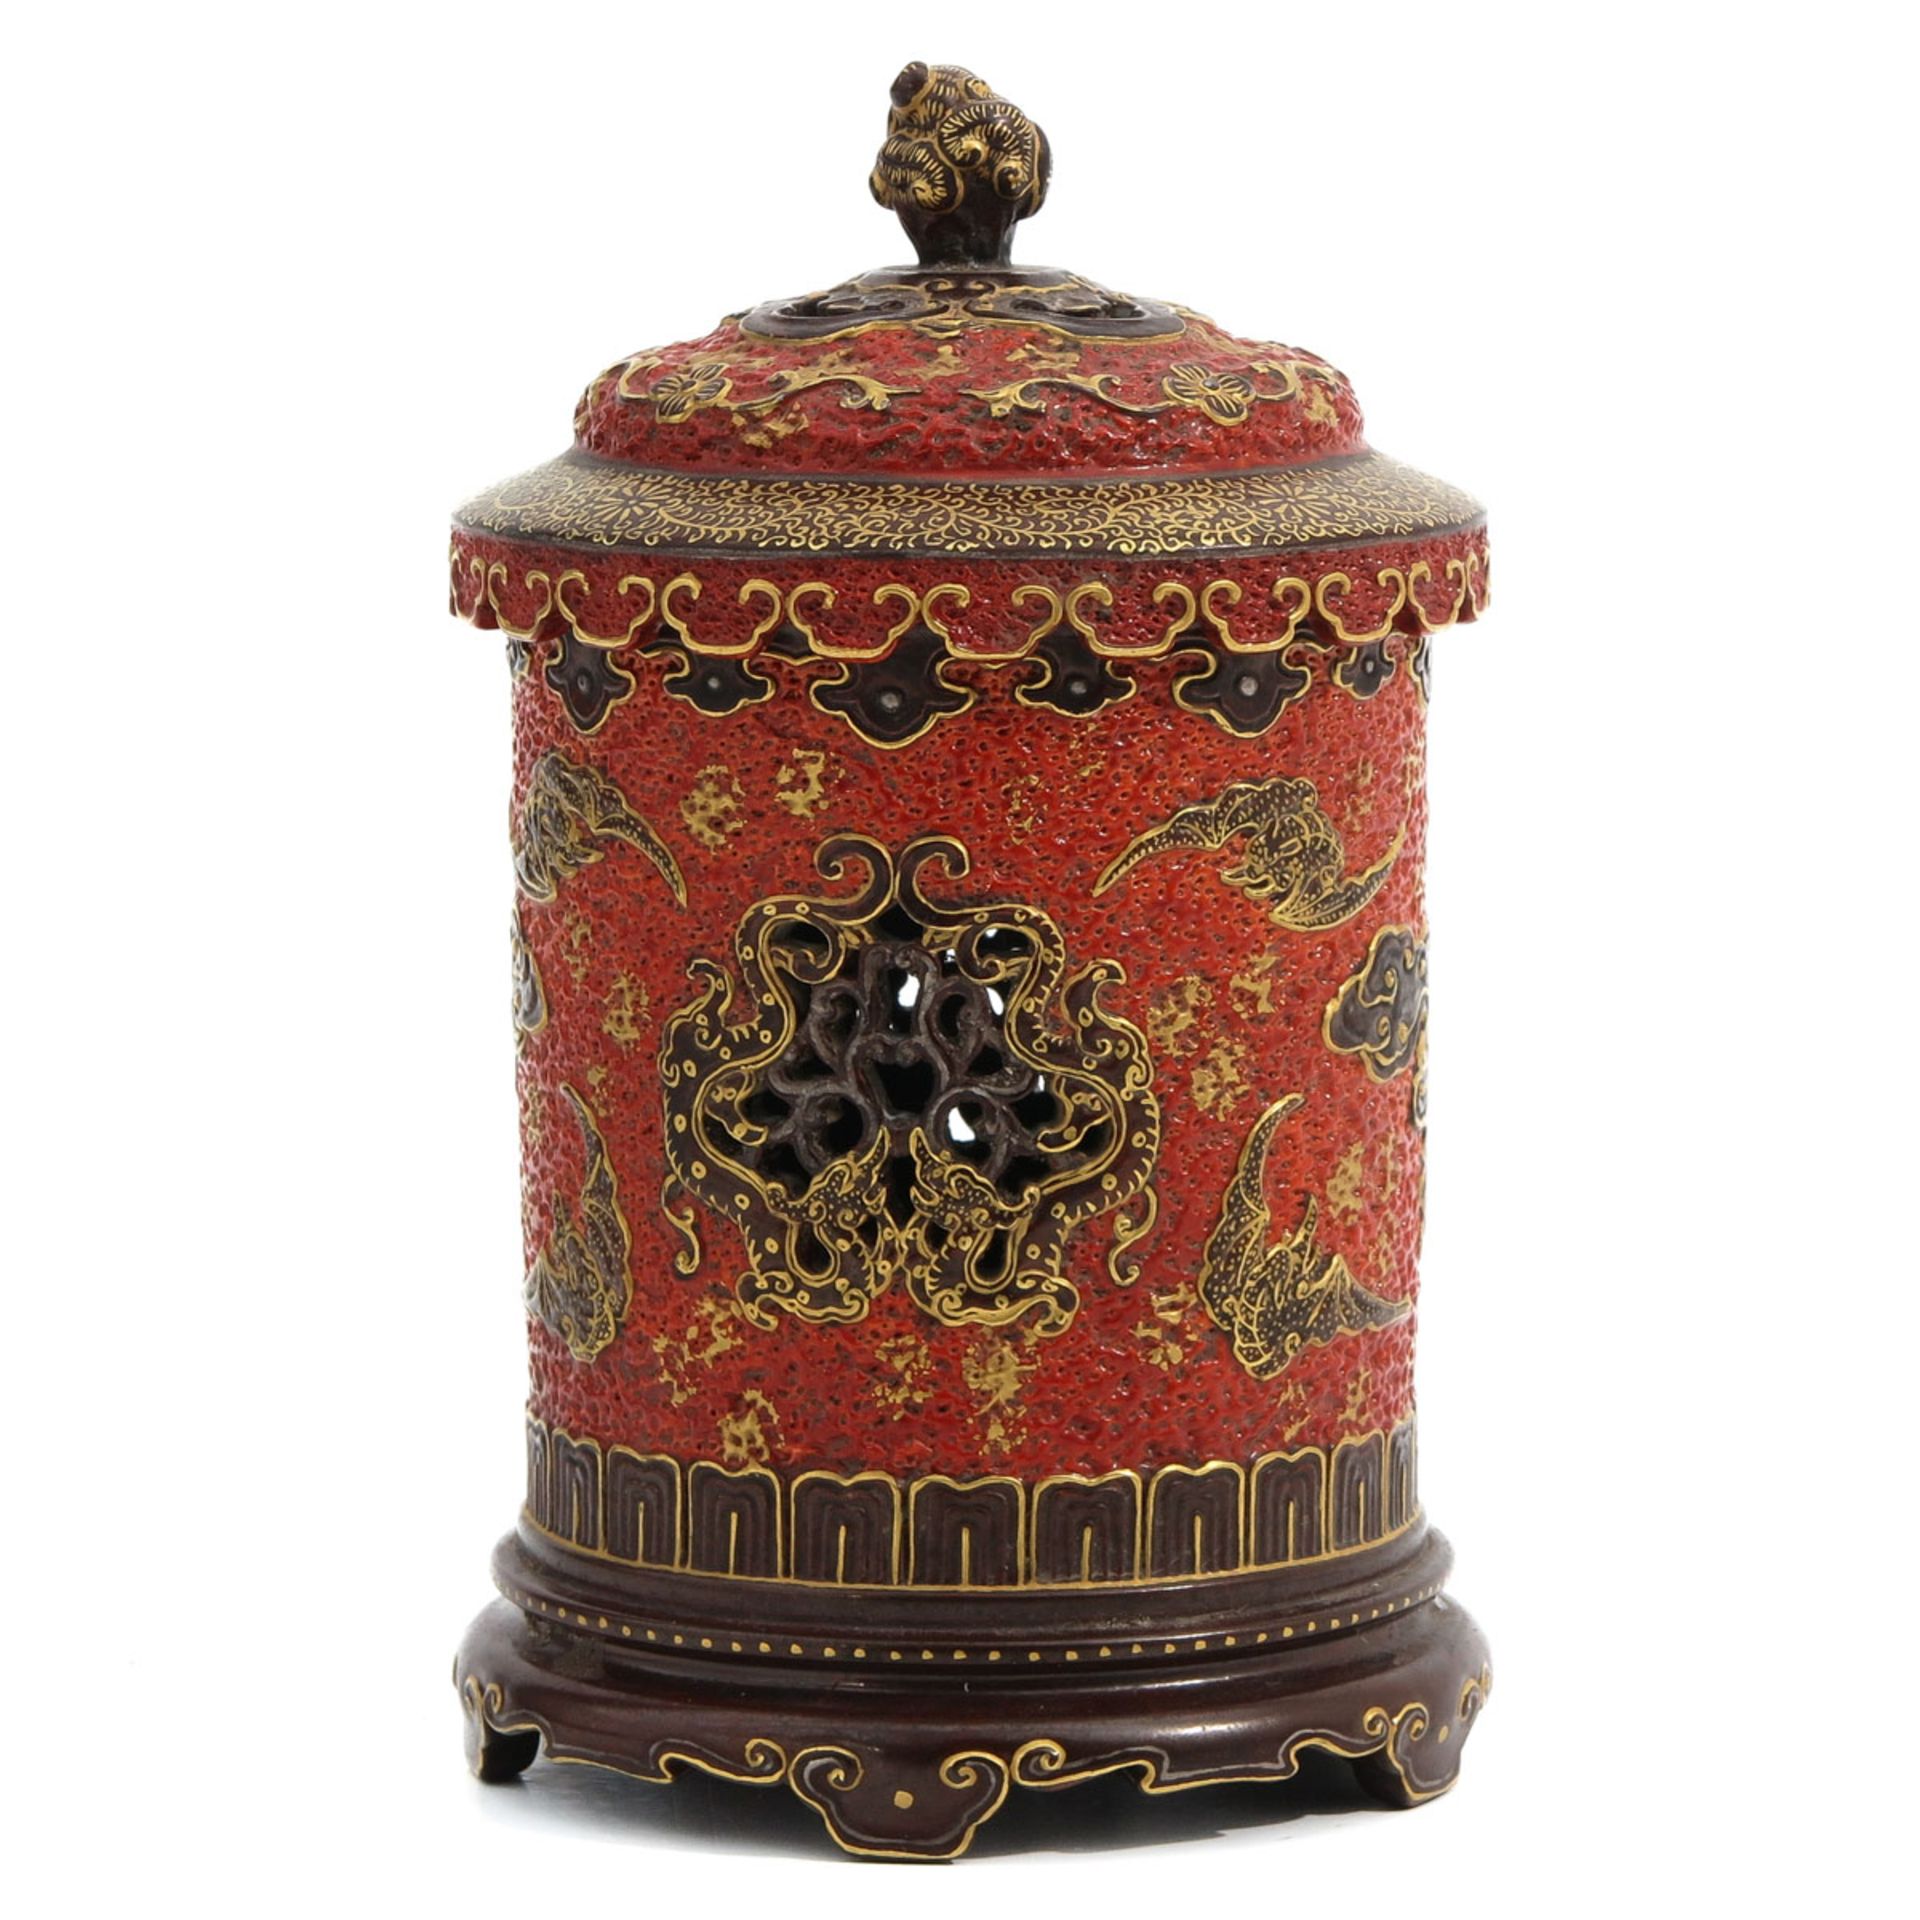 A Orange and Gilt Pot with Cover